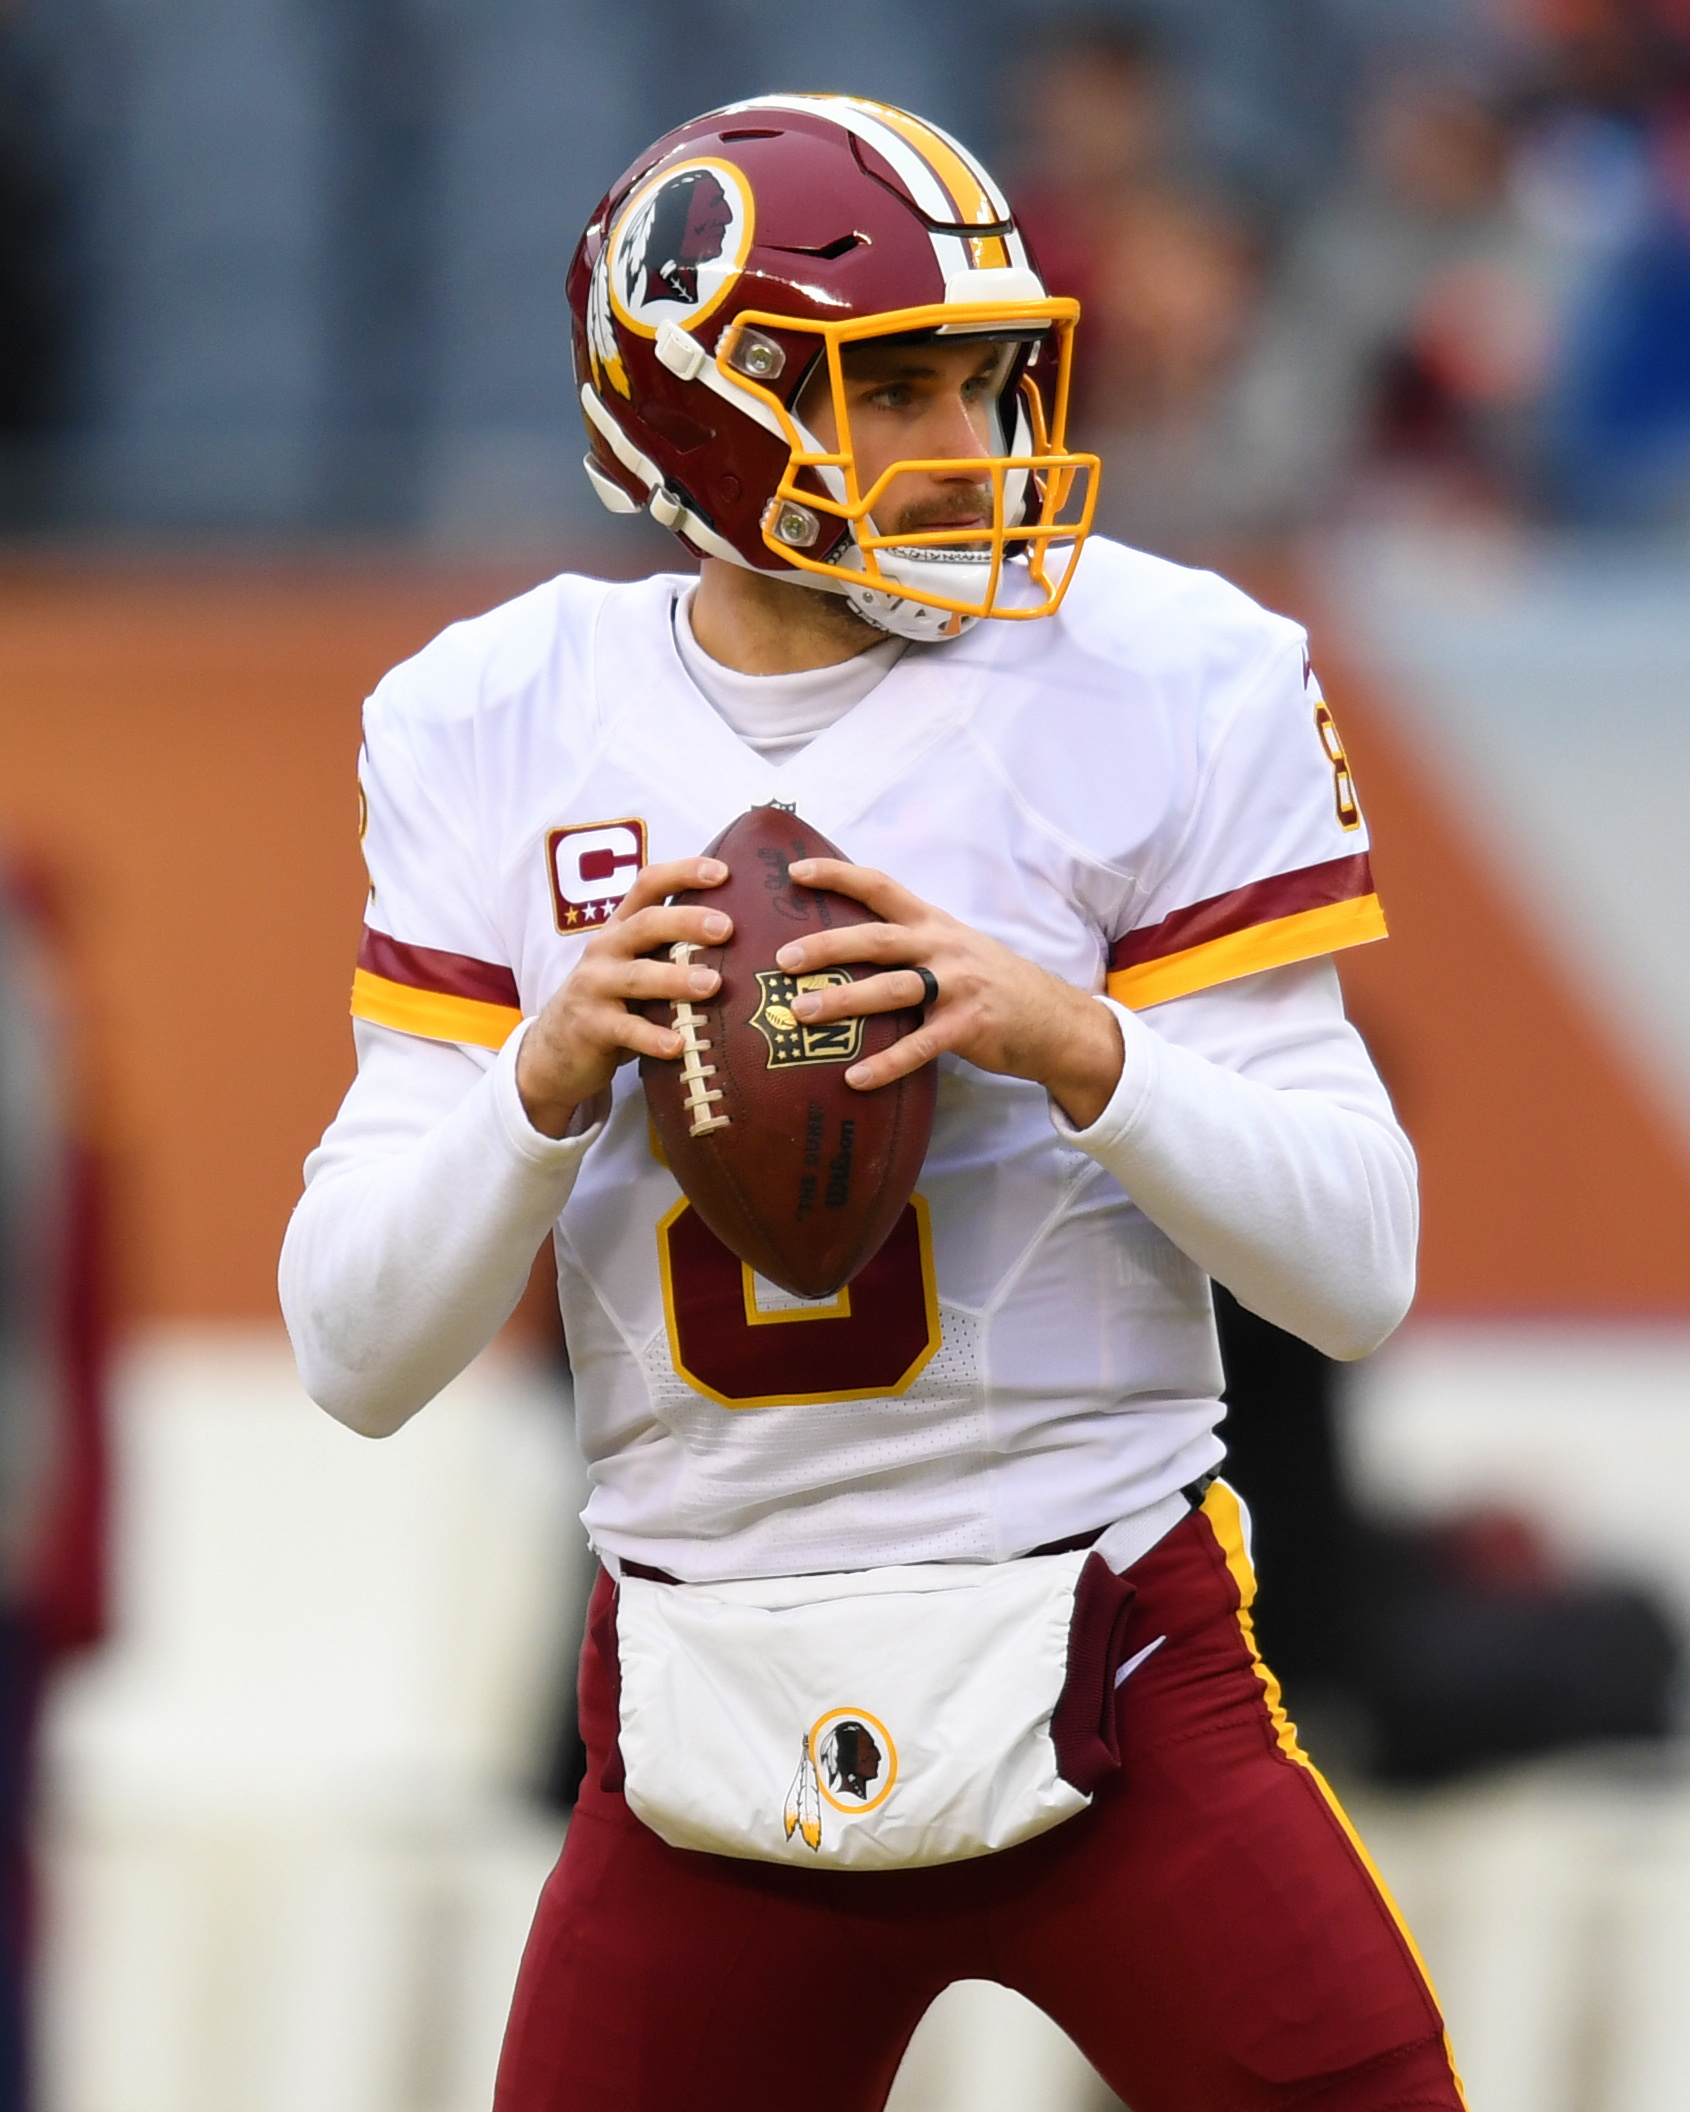 Redskins Want Long-Term Kirk Cousins Deal According to People